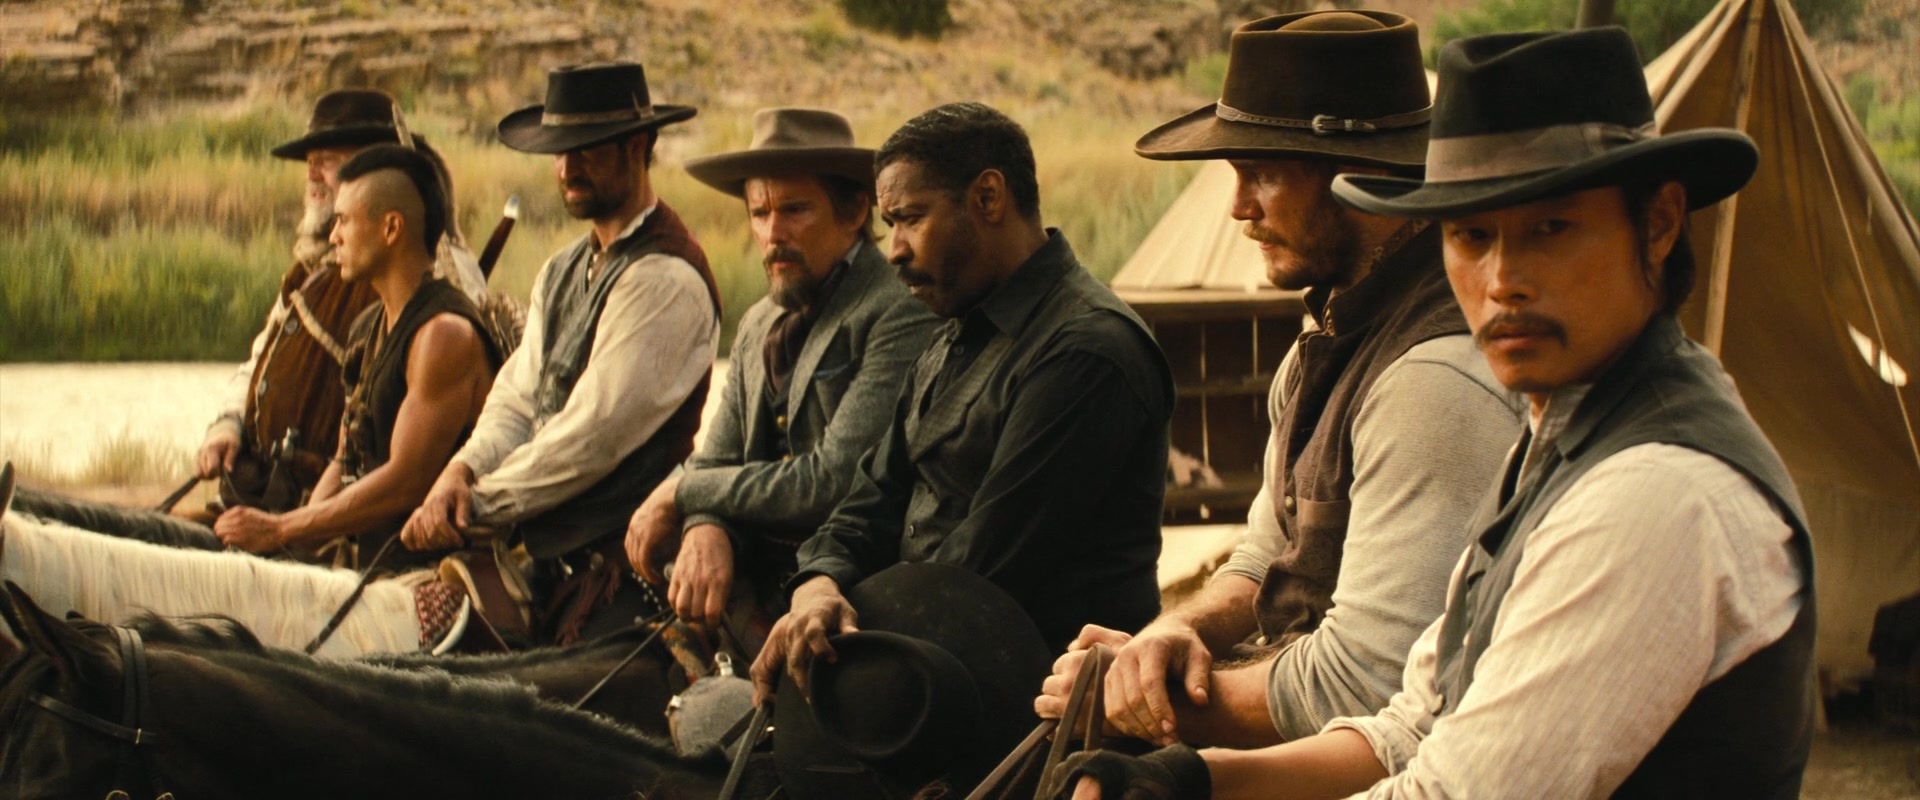 the_magnificent_seven_2016_1080p_bluray_x264-sparks_218.jpg